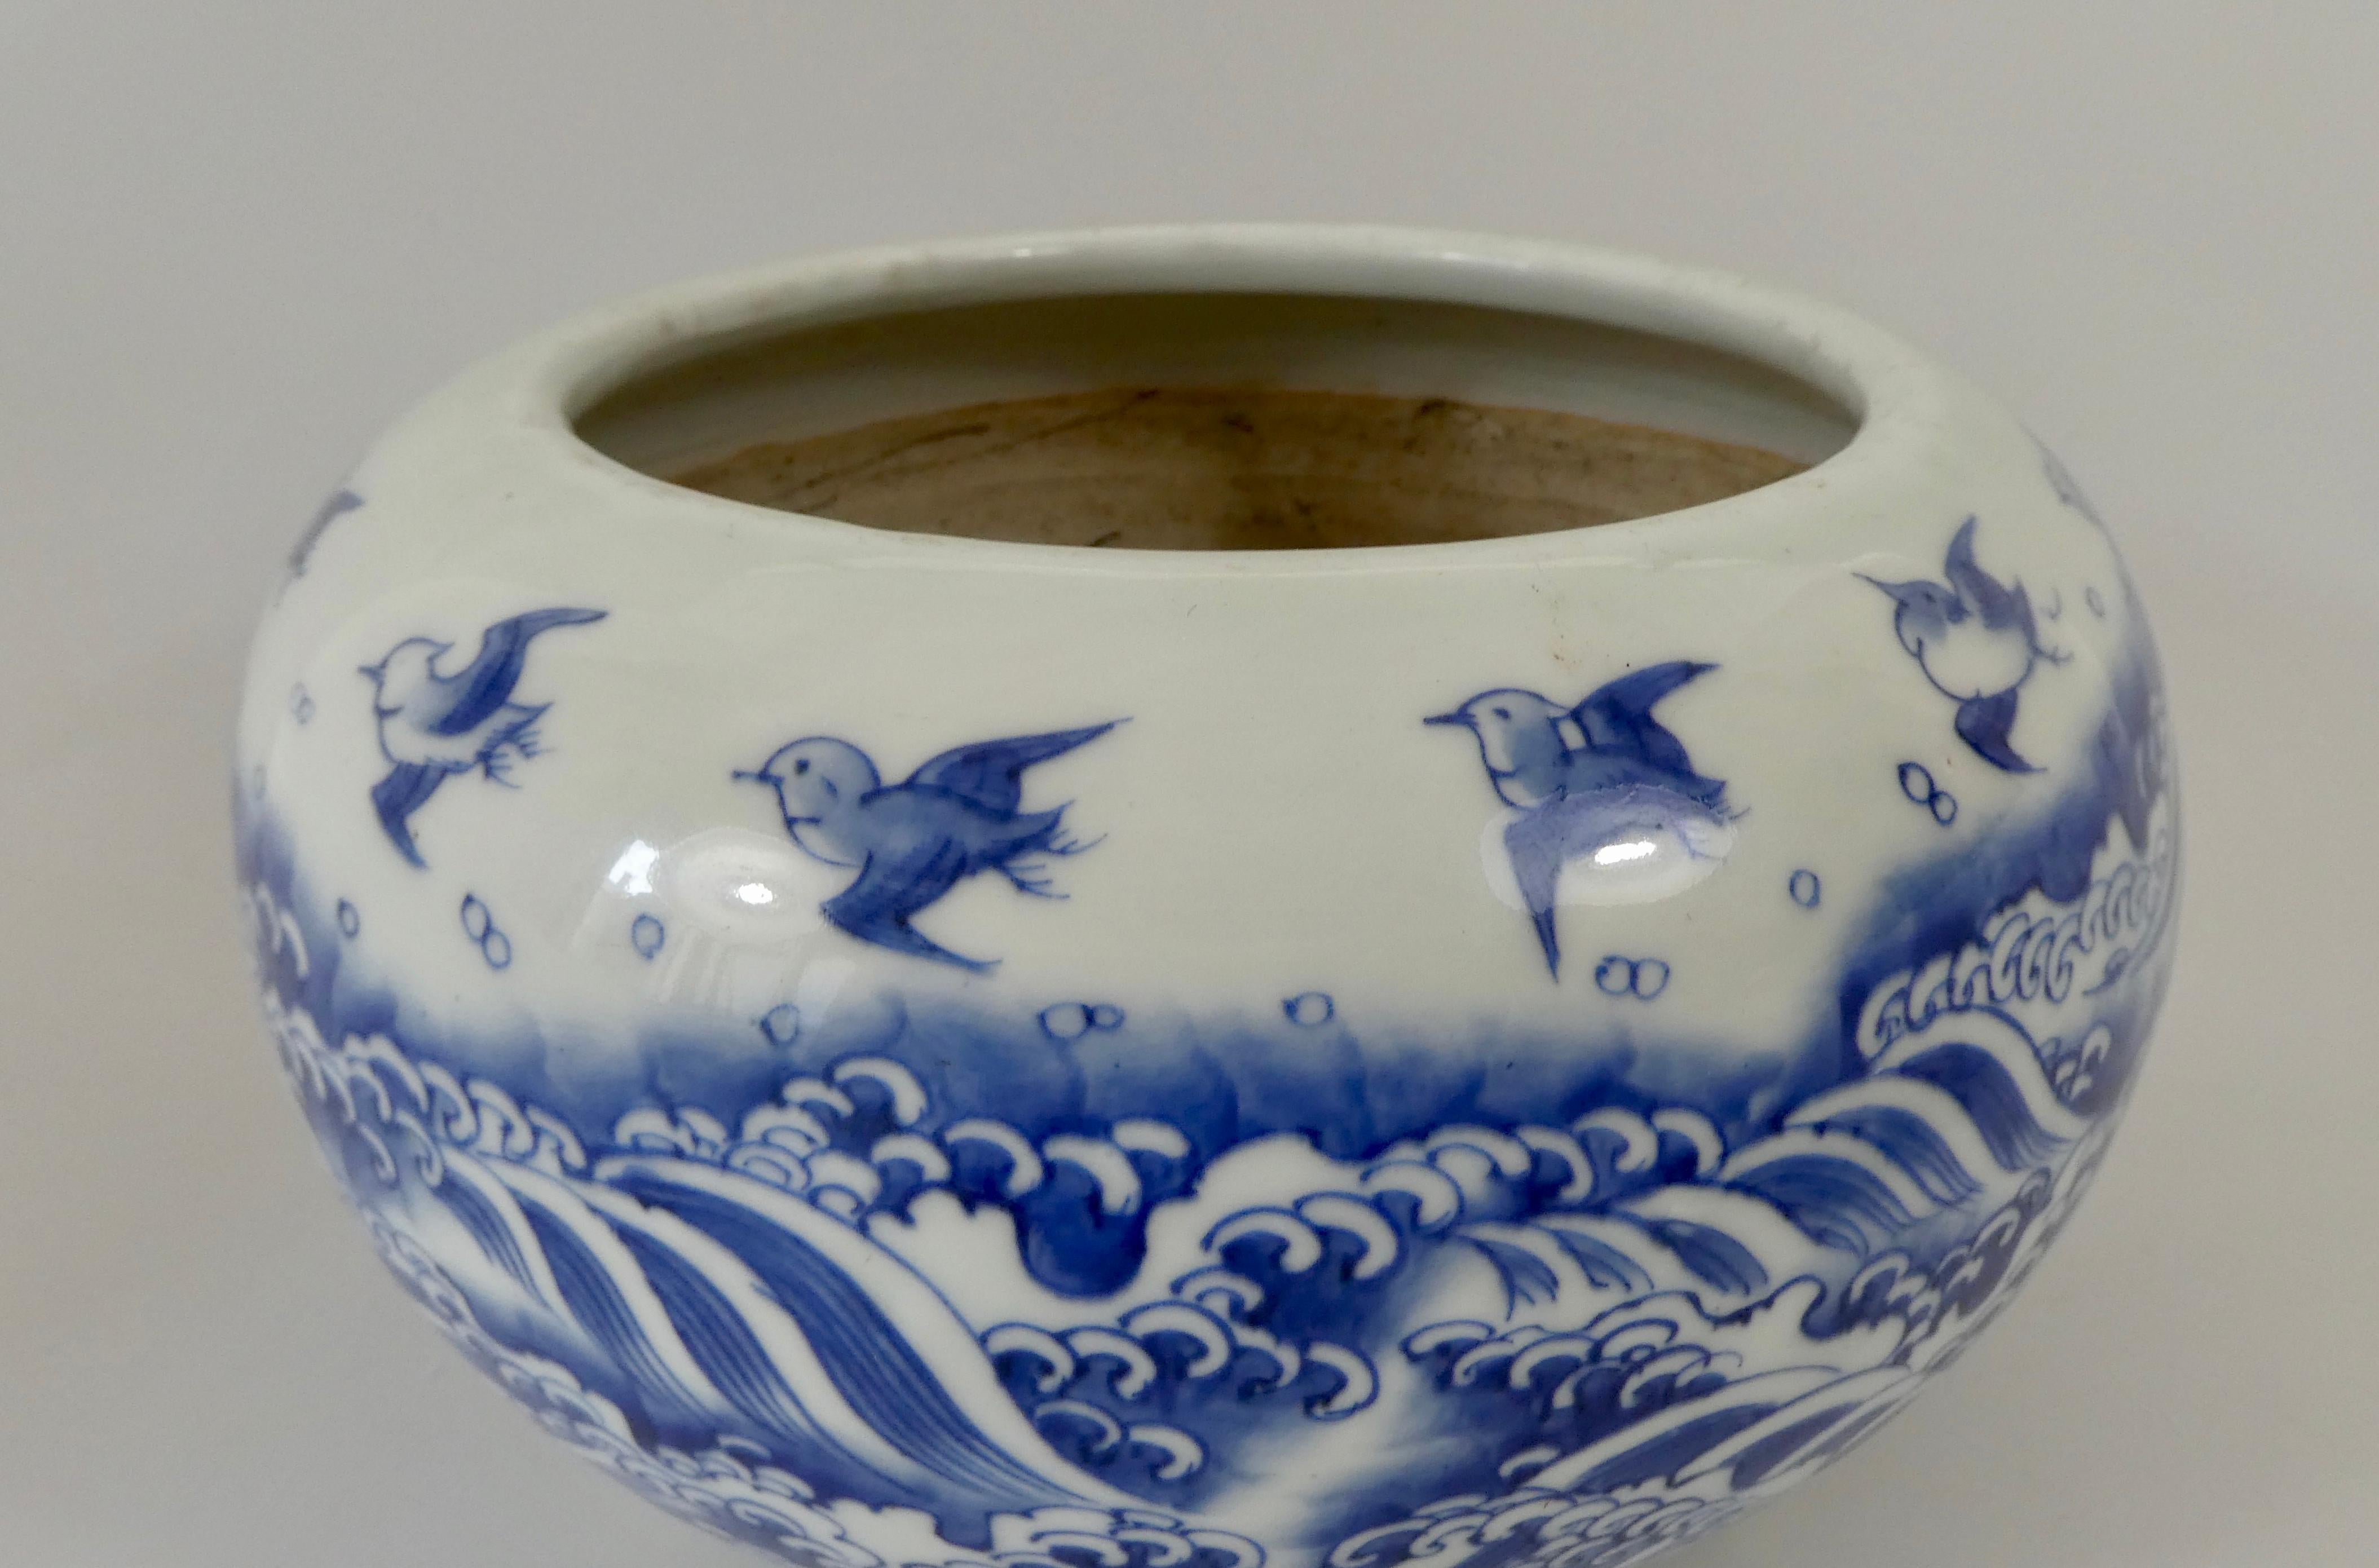 A Japanese porcelain censer, Arita, circa 1890, Meiji Period. The globular body painted in underglaze blue, with a continuous scent of birds, flying above crashing waves. Set upon three stub feet.
Measures: Diameter - 25 cm, 9 7/8”.
Height - 16